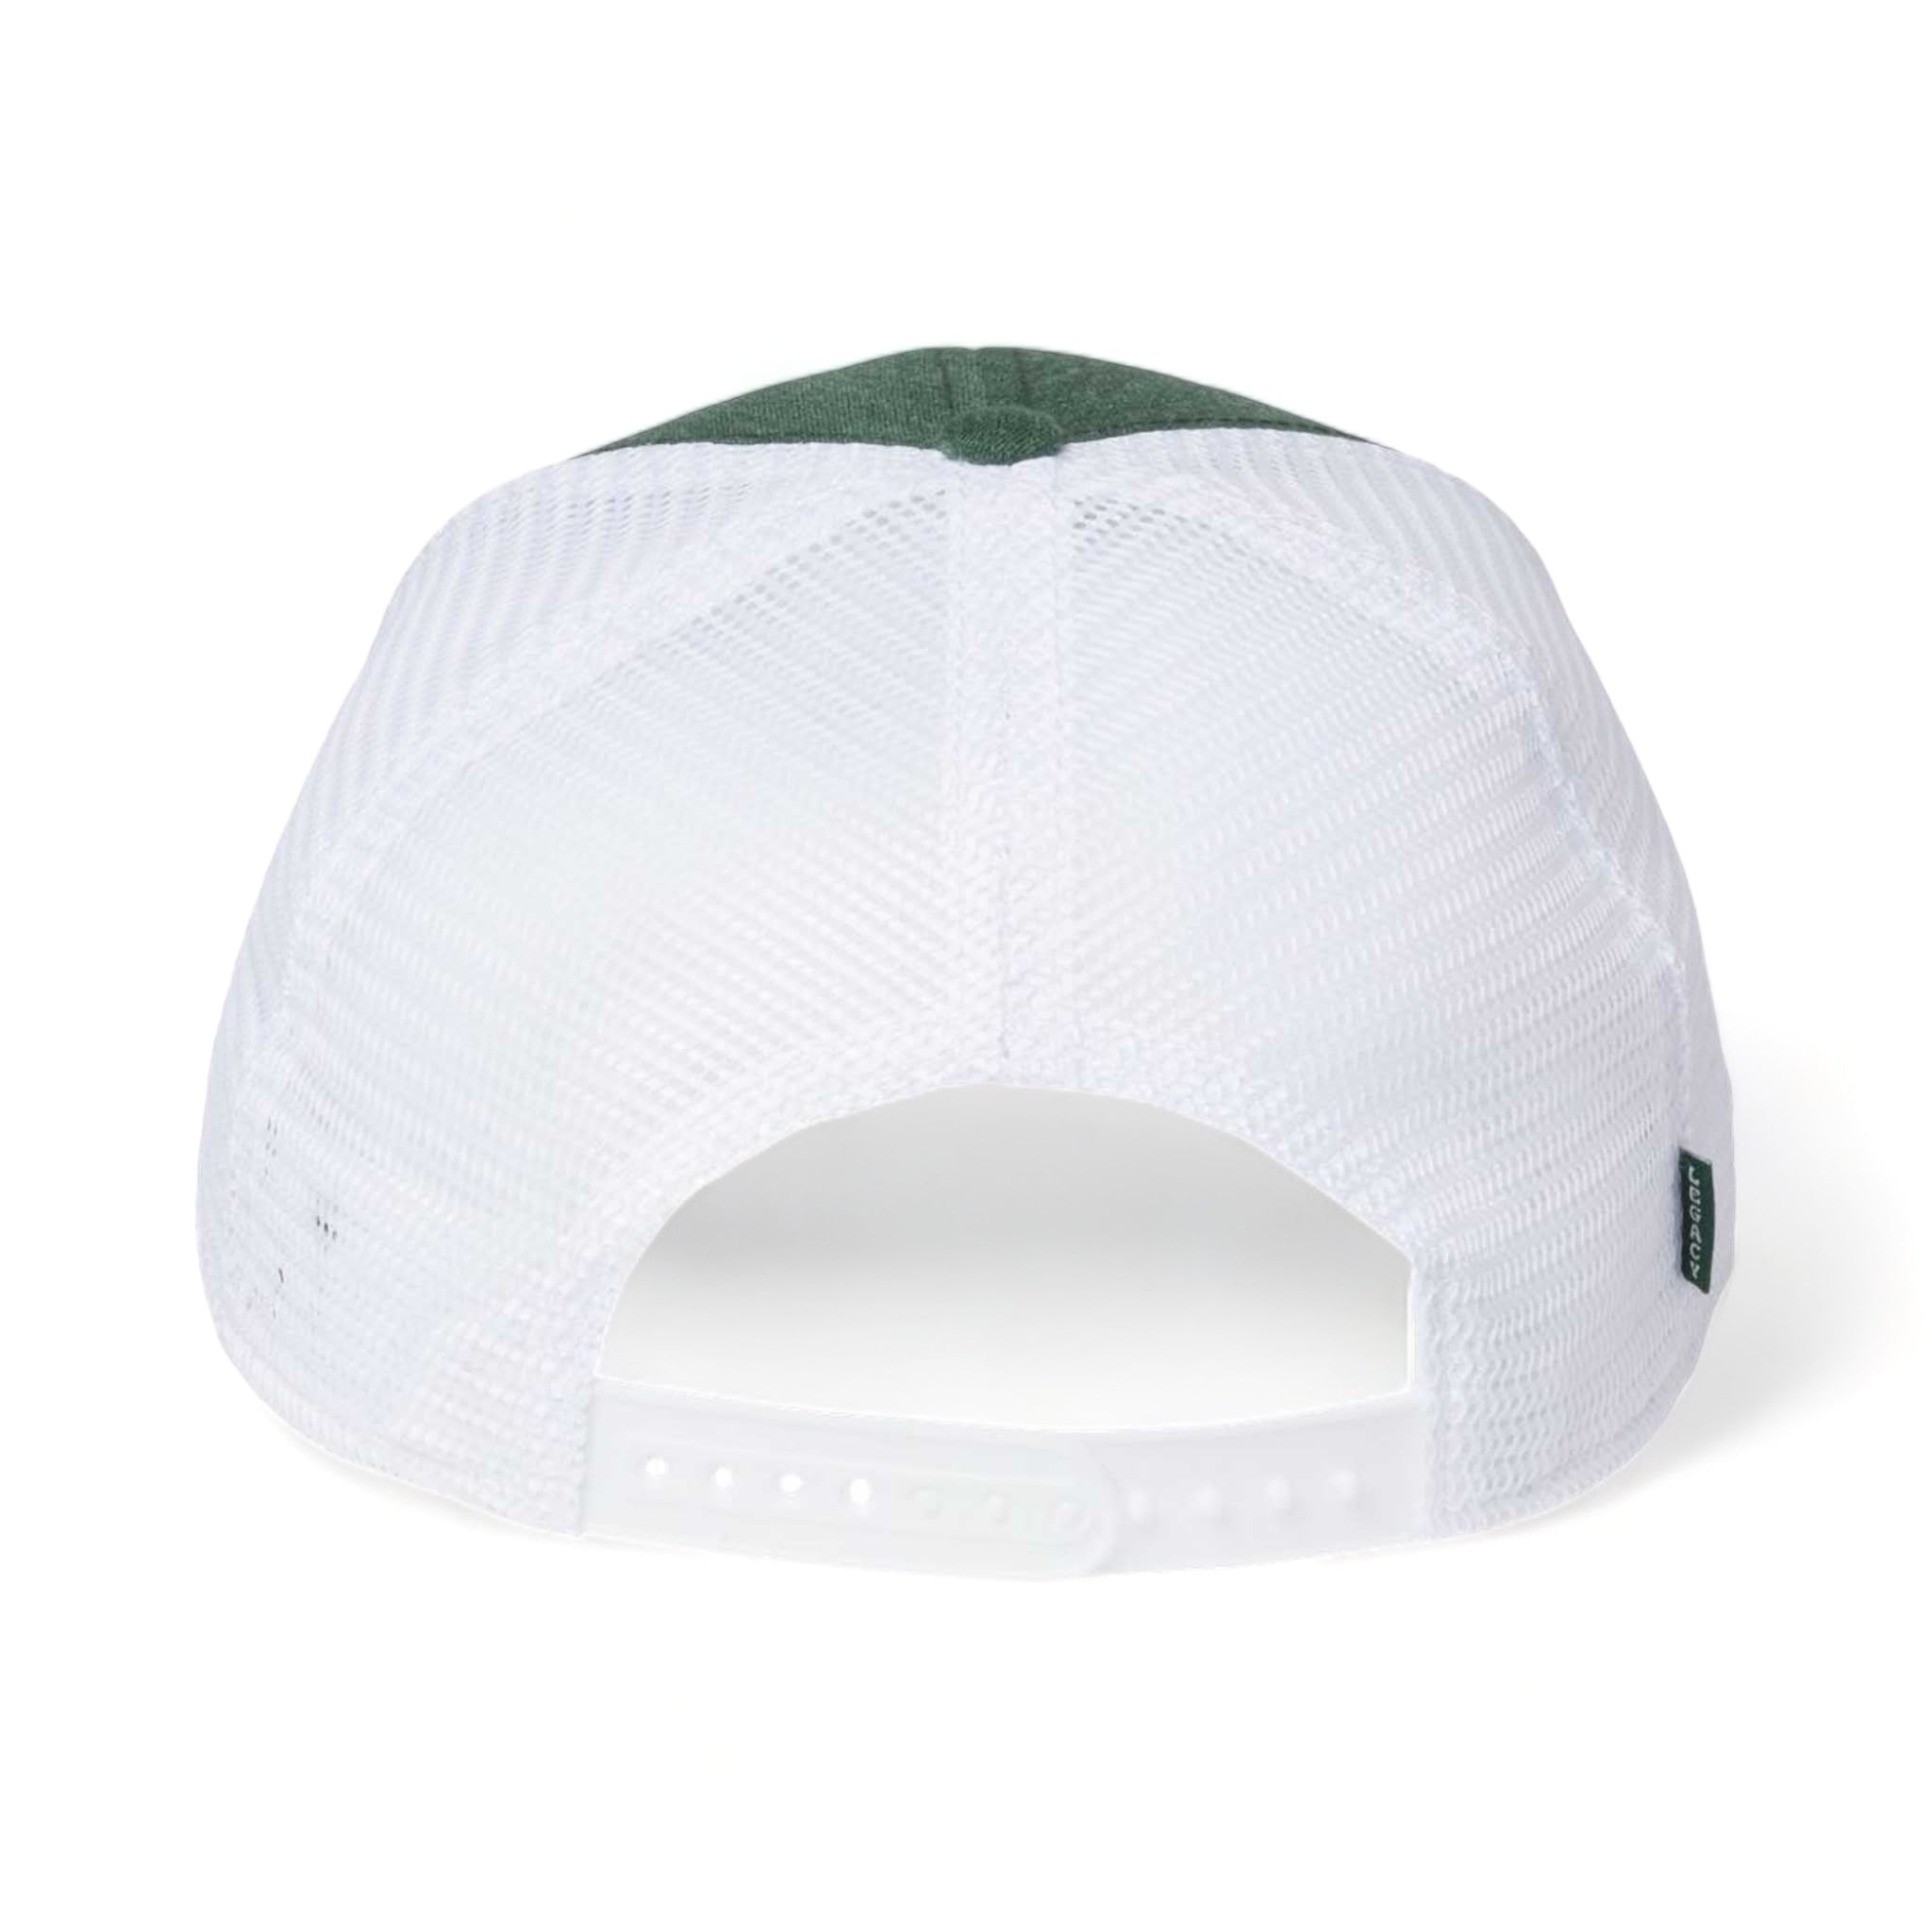 Back view of LEGACY MPS custom hat in mélange dark green and white